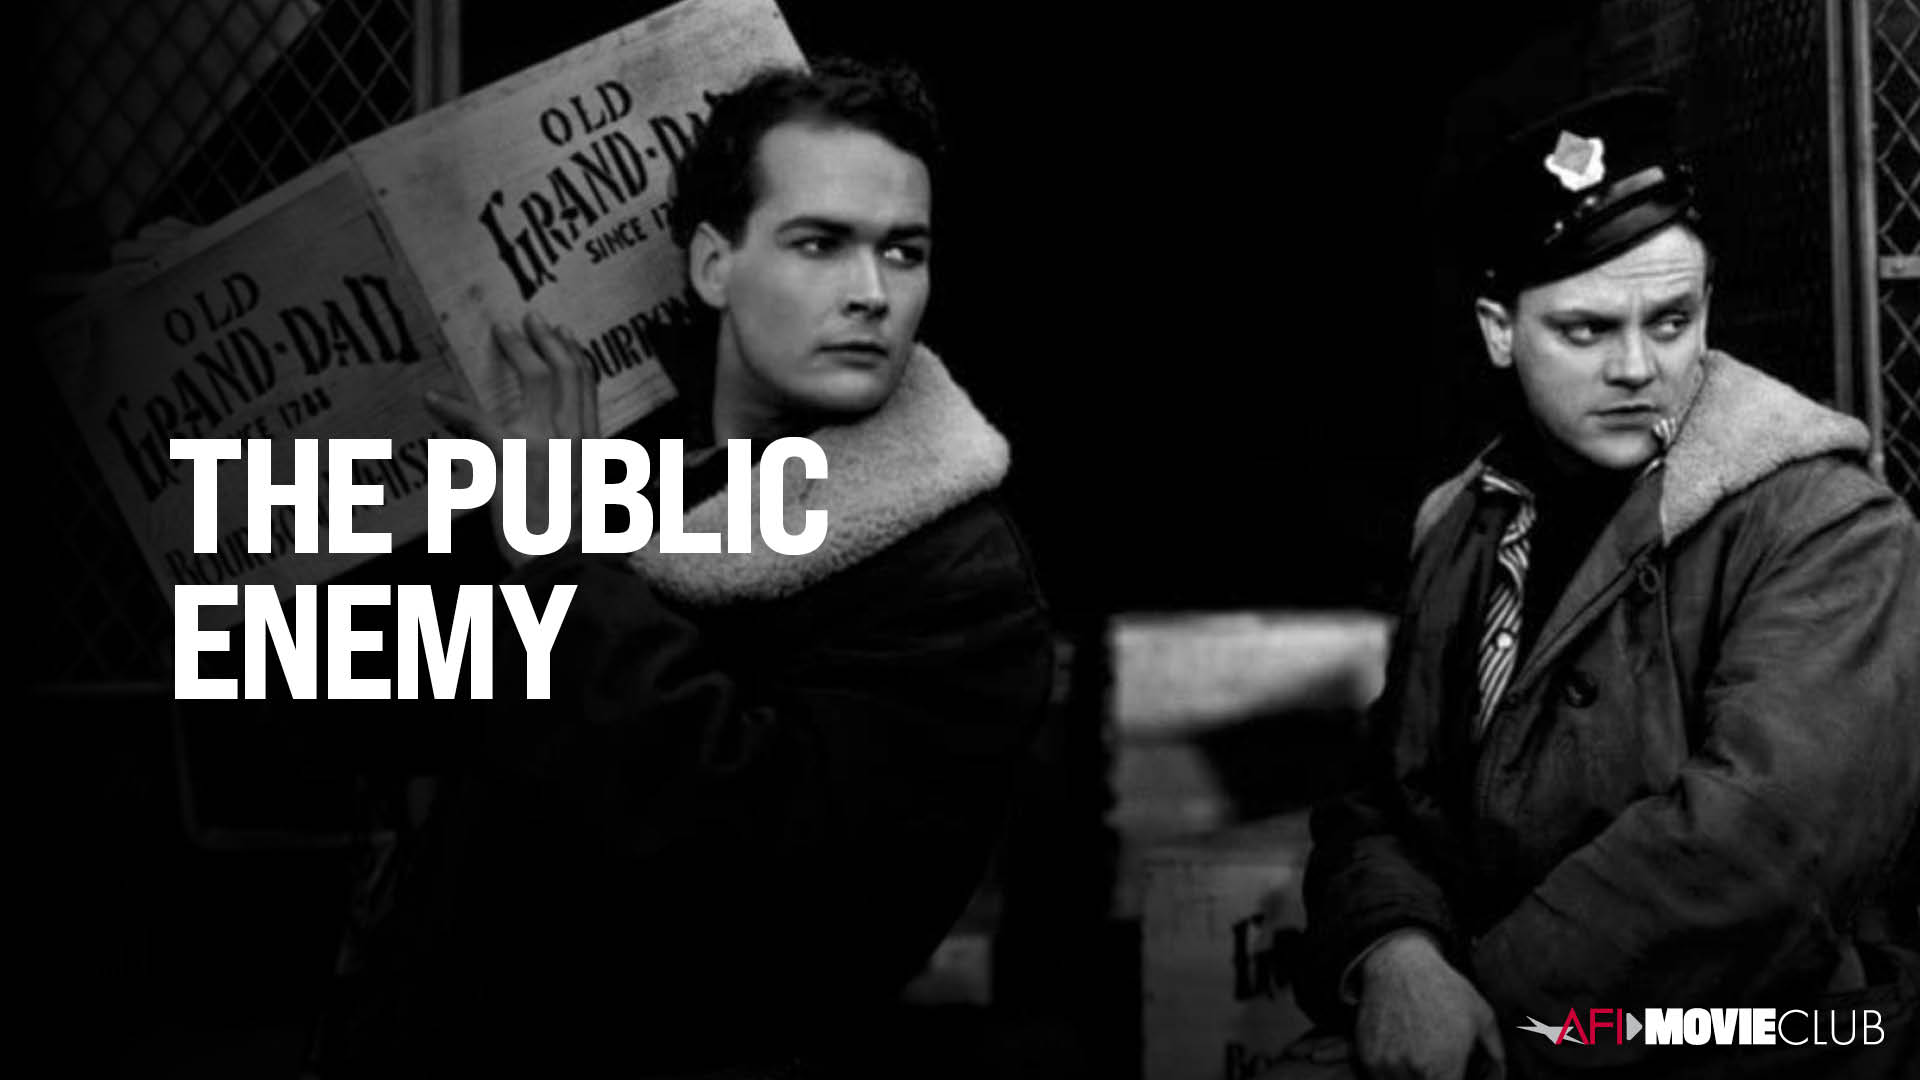 Public Enemy Film Still - James Cagney and Edward Woods